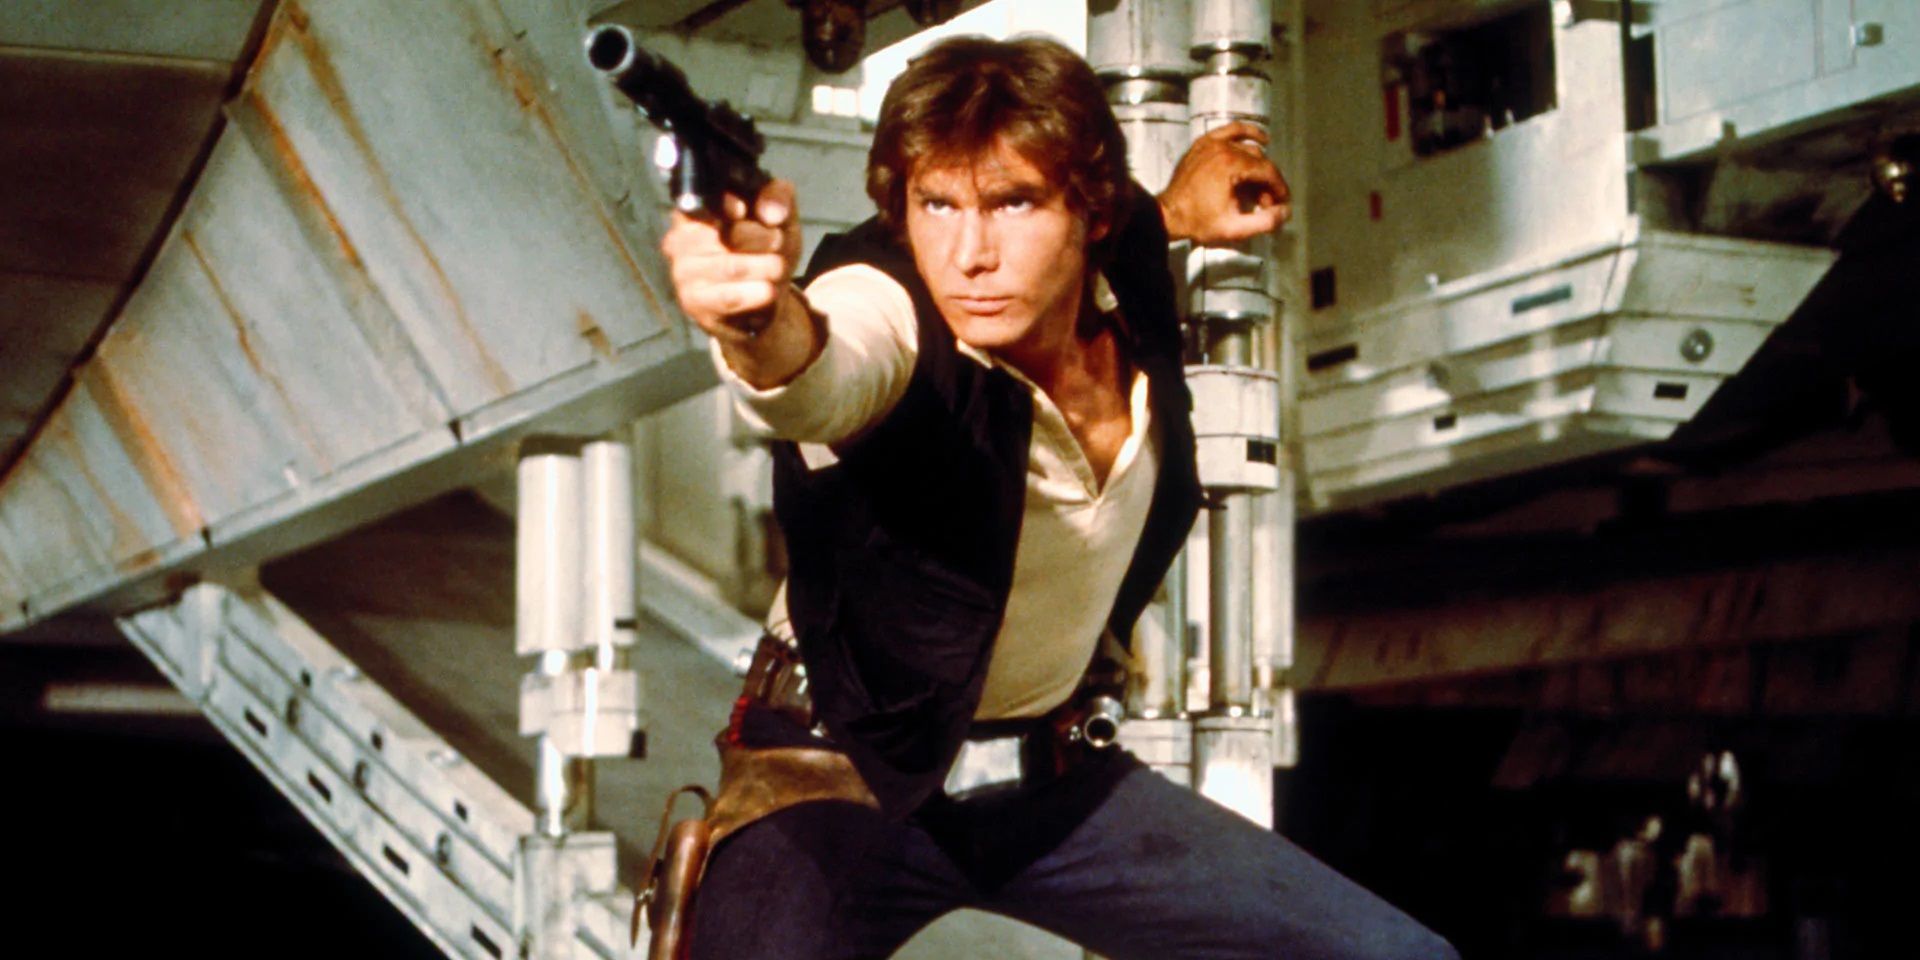 Harrison Ford as Han Solo 1